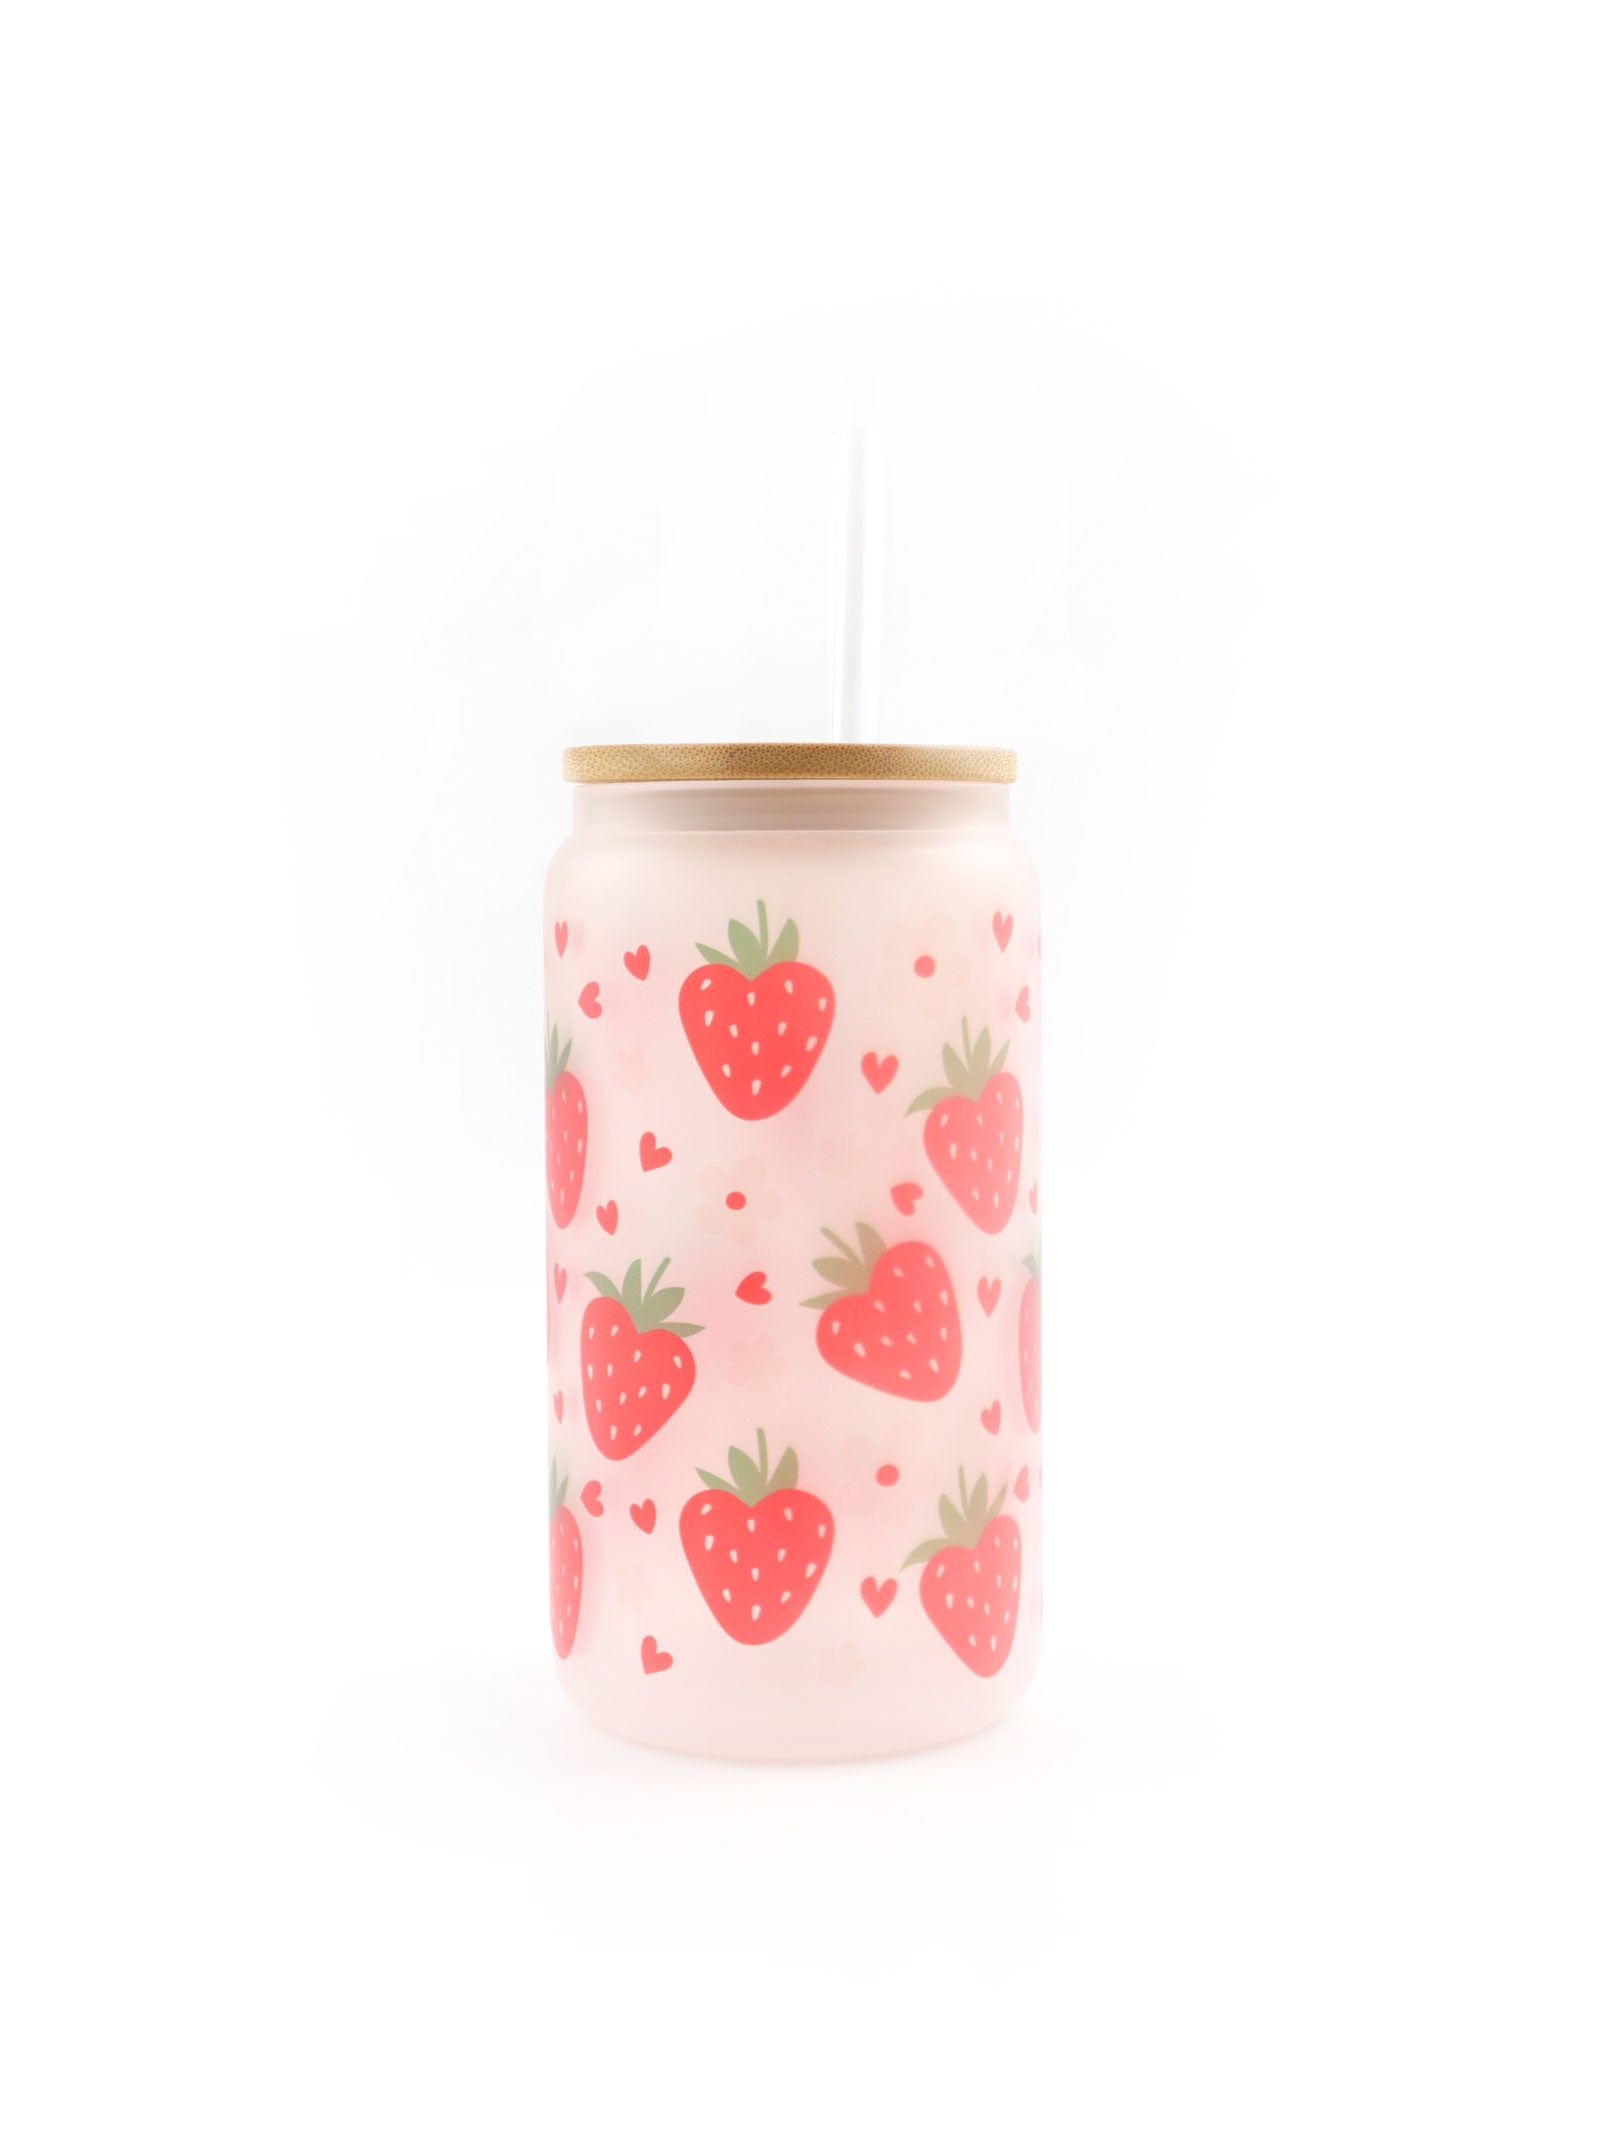 BERRIES & HEART | 16 OZ GLASS TUMBLER WITH BAMBOO LID & STRAW